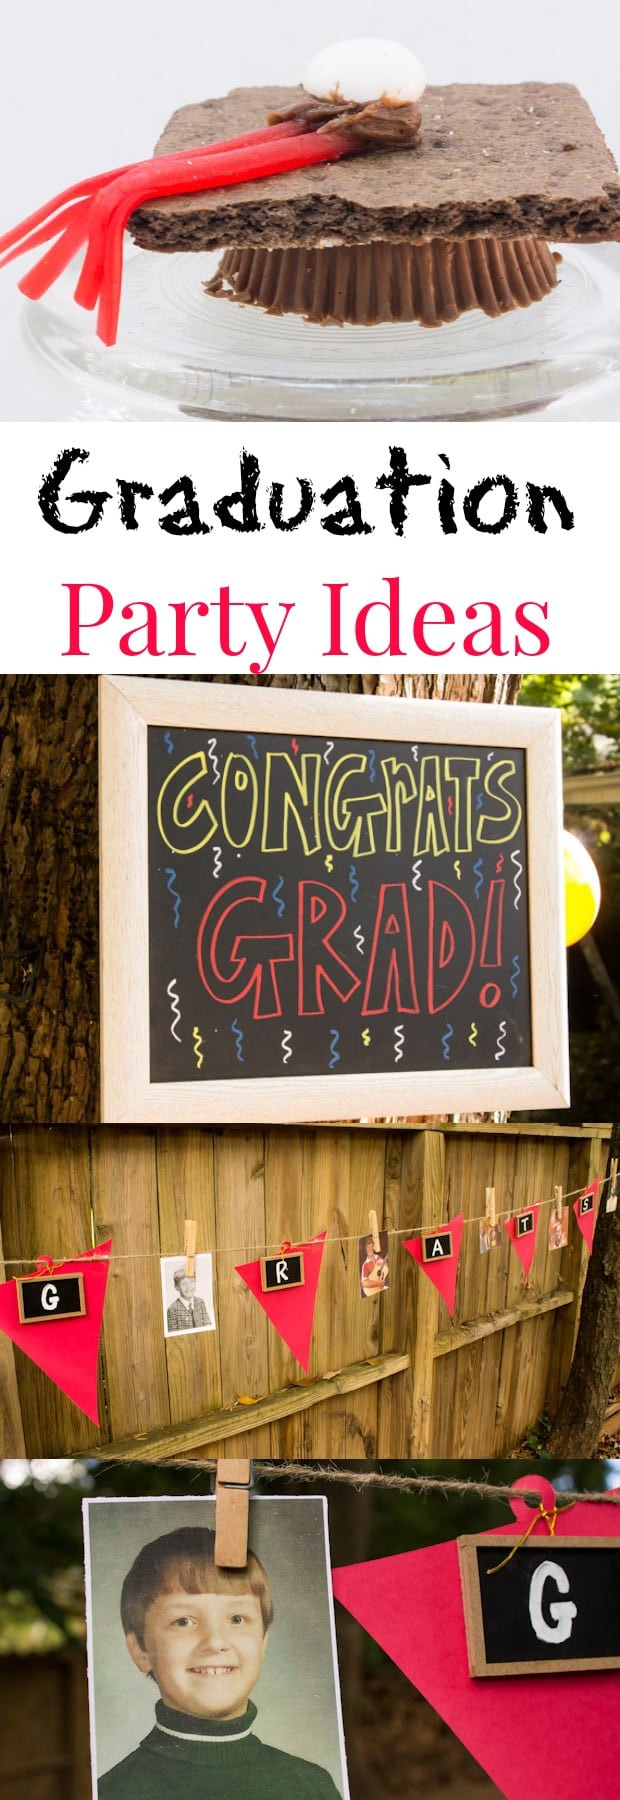 Graduation Party Picture Collage Ideas
 Graduation Party Ideas for All Ages